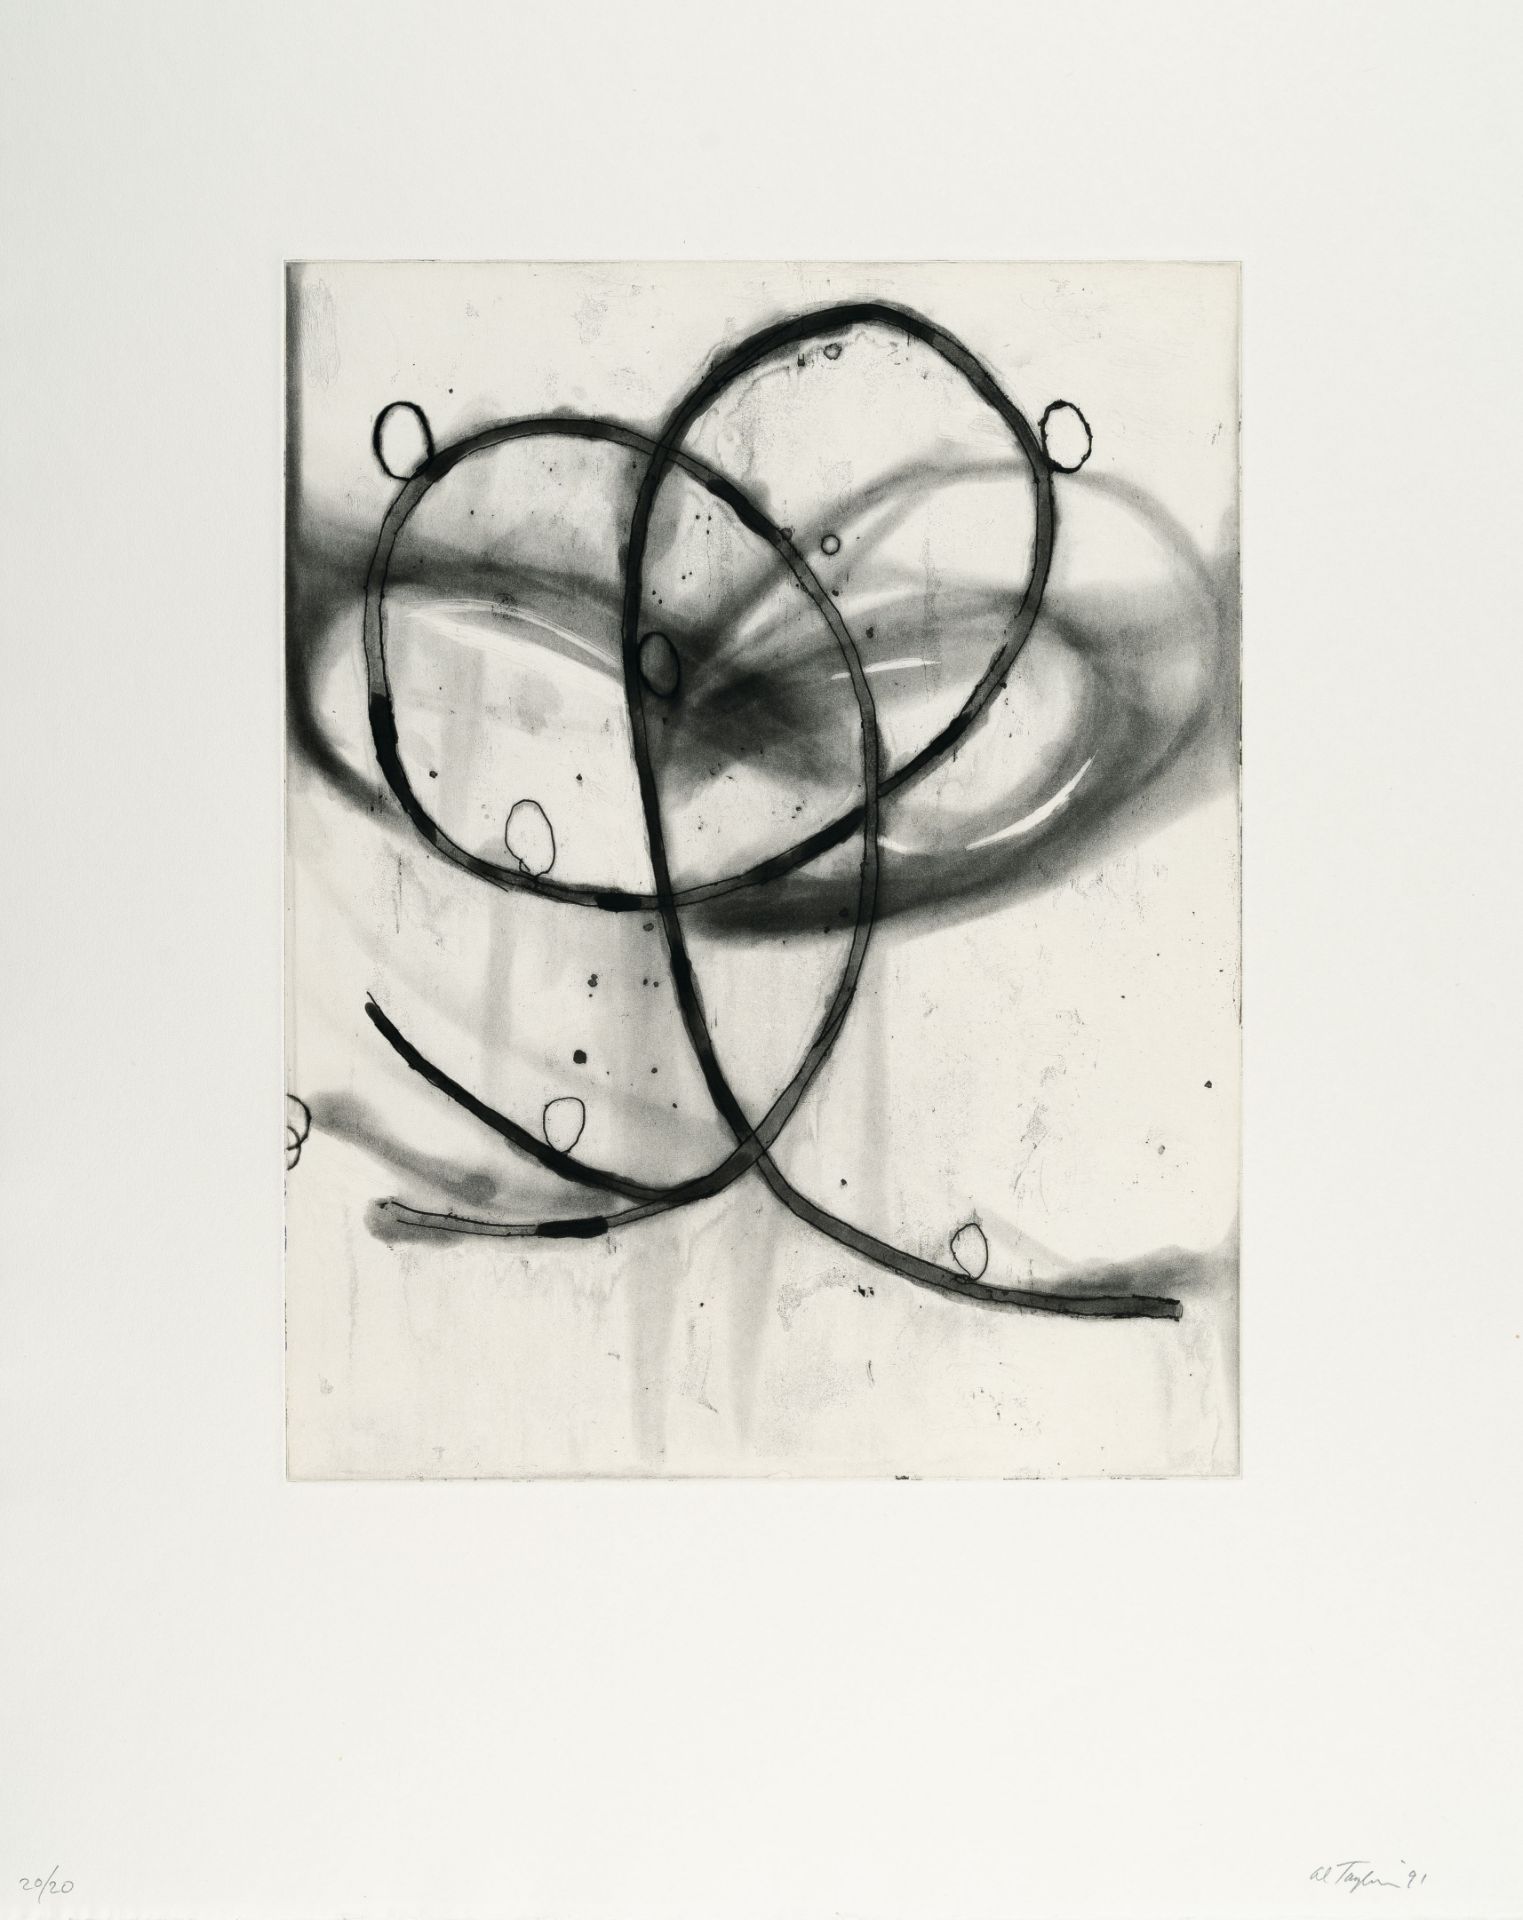 Al Taylor, Pass the peas III.Etching with drypoint and aquatint on wove. (19)91. Ca. 35 x 27.5 cm (